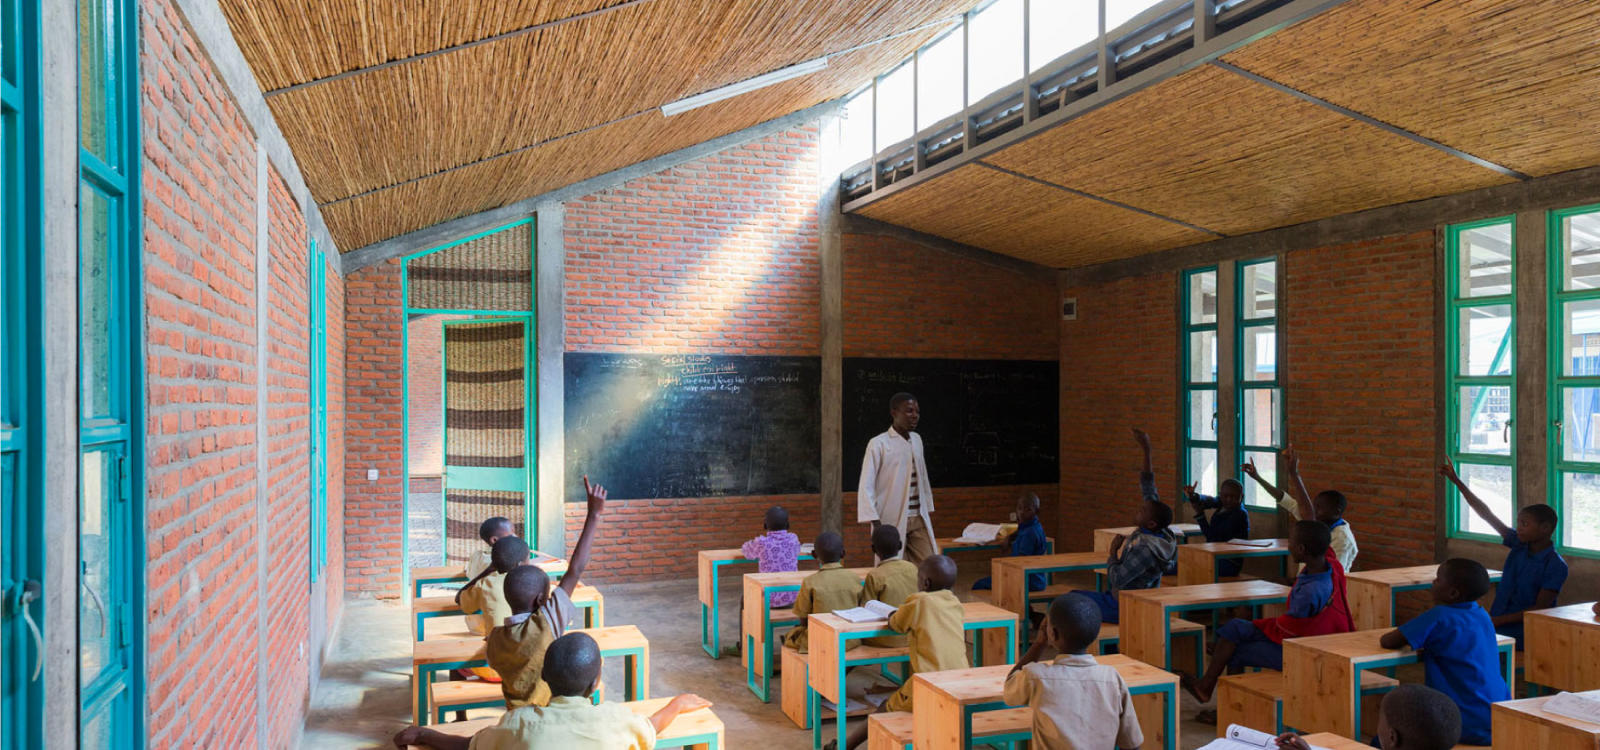 Students studying in a classroom designed to minimize direct sunlight in Rwanda